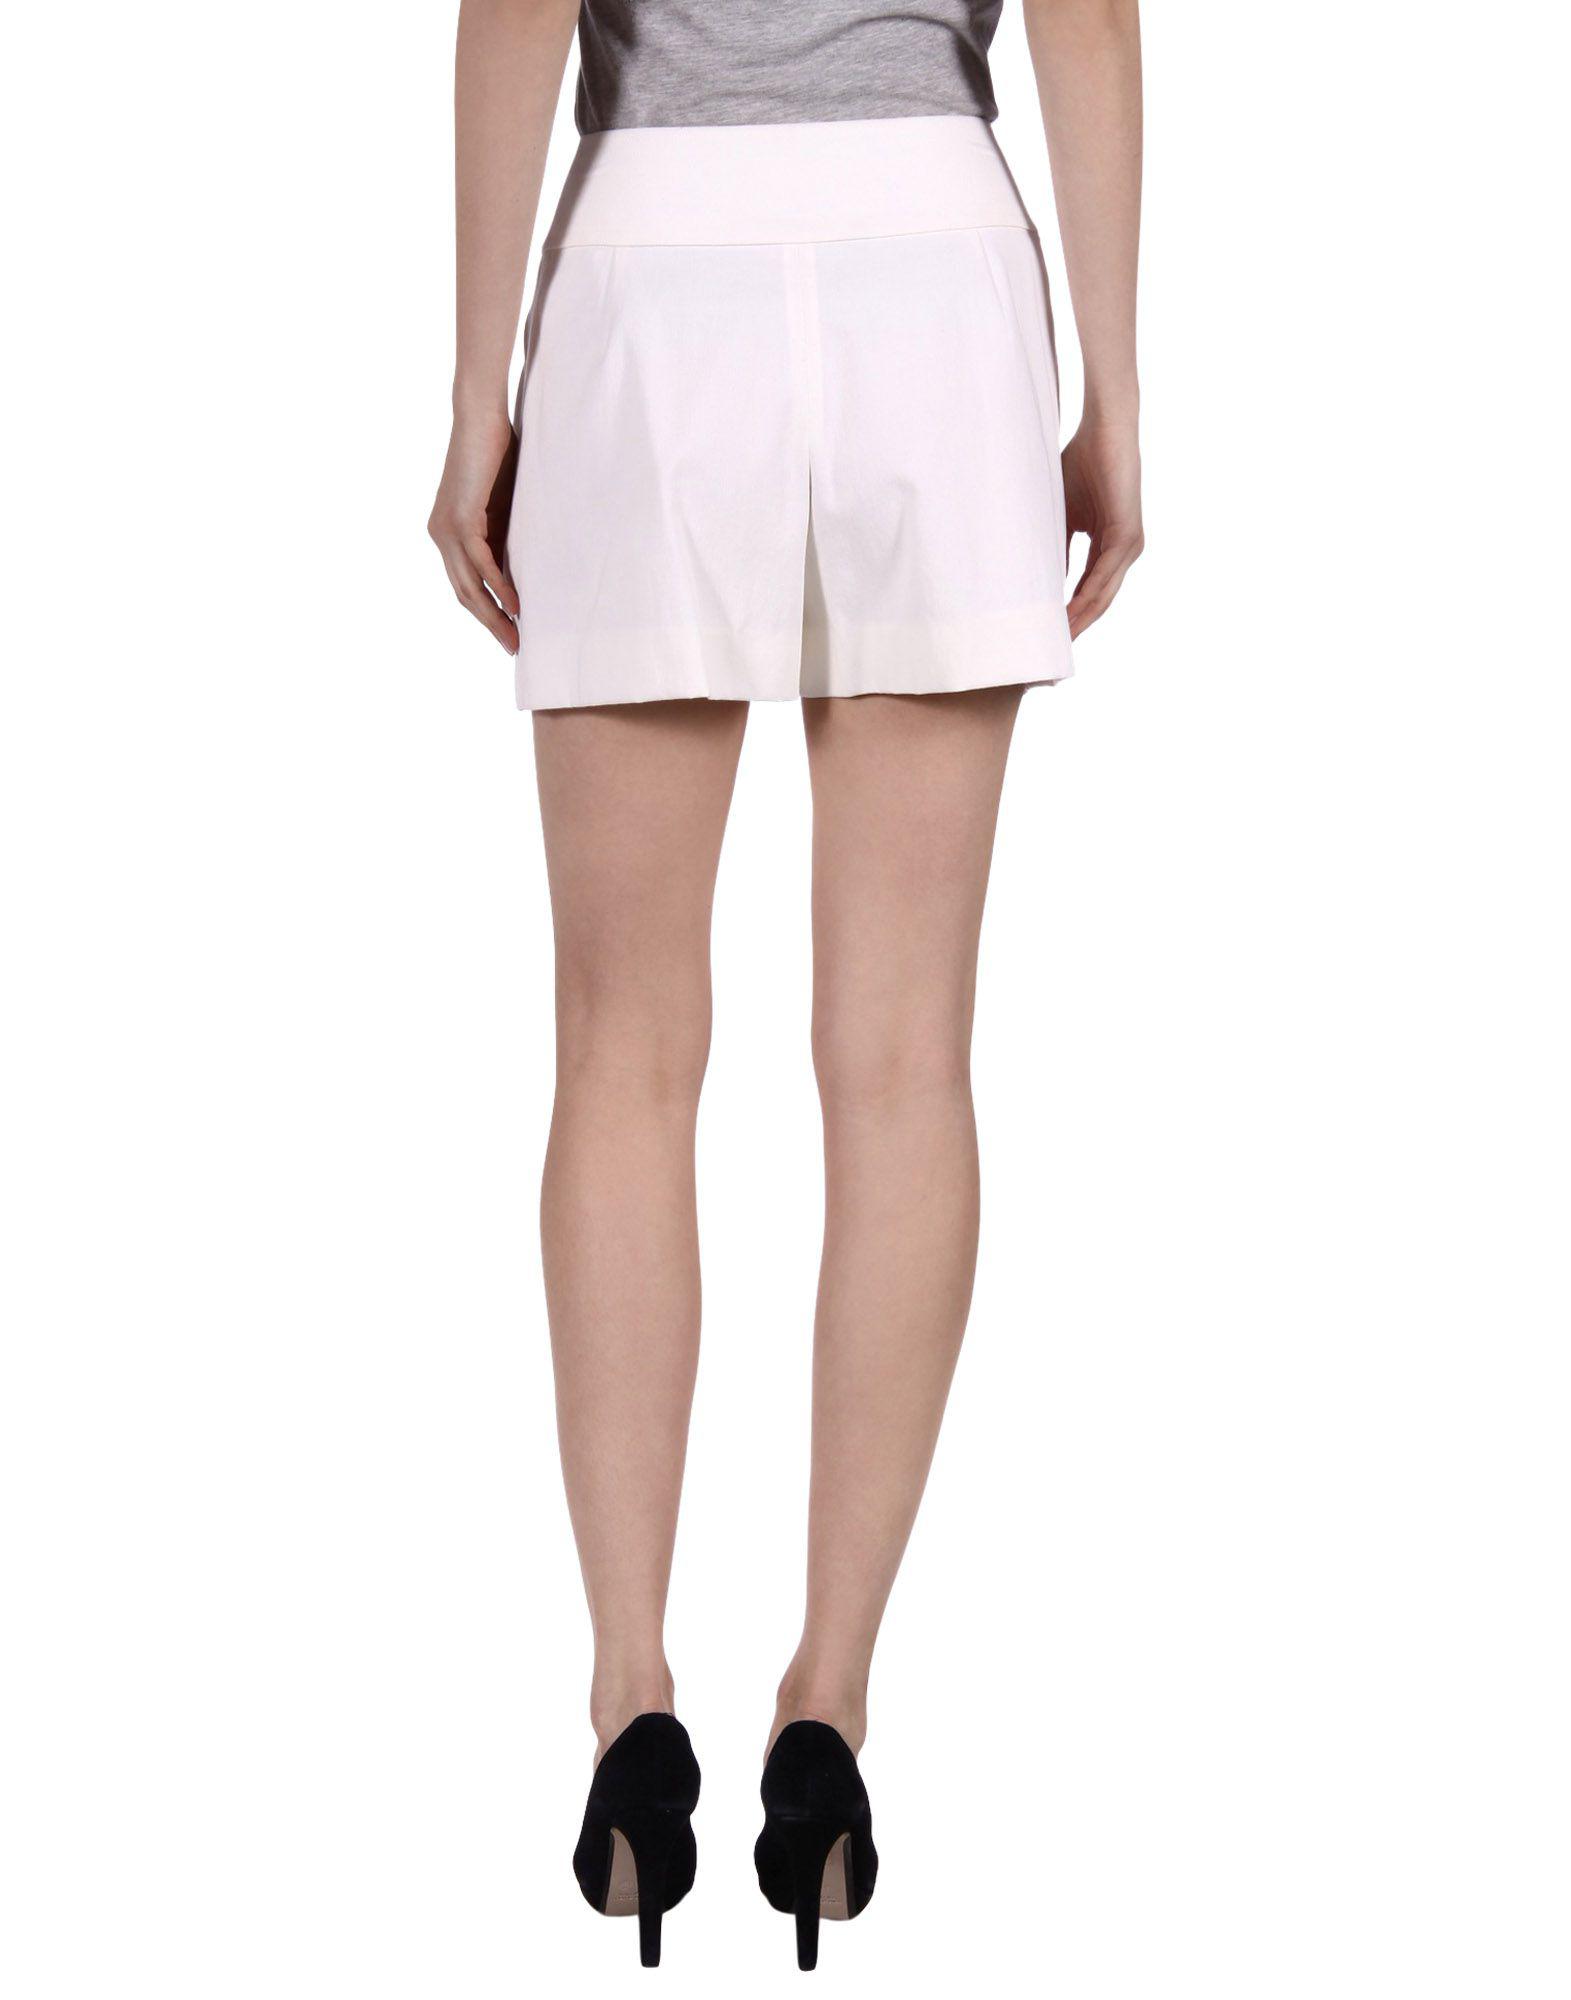 Chloé Cotton Shorts in Ivory (Pink) - Lyst